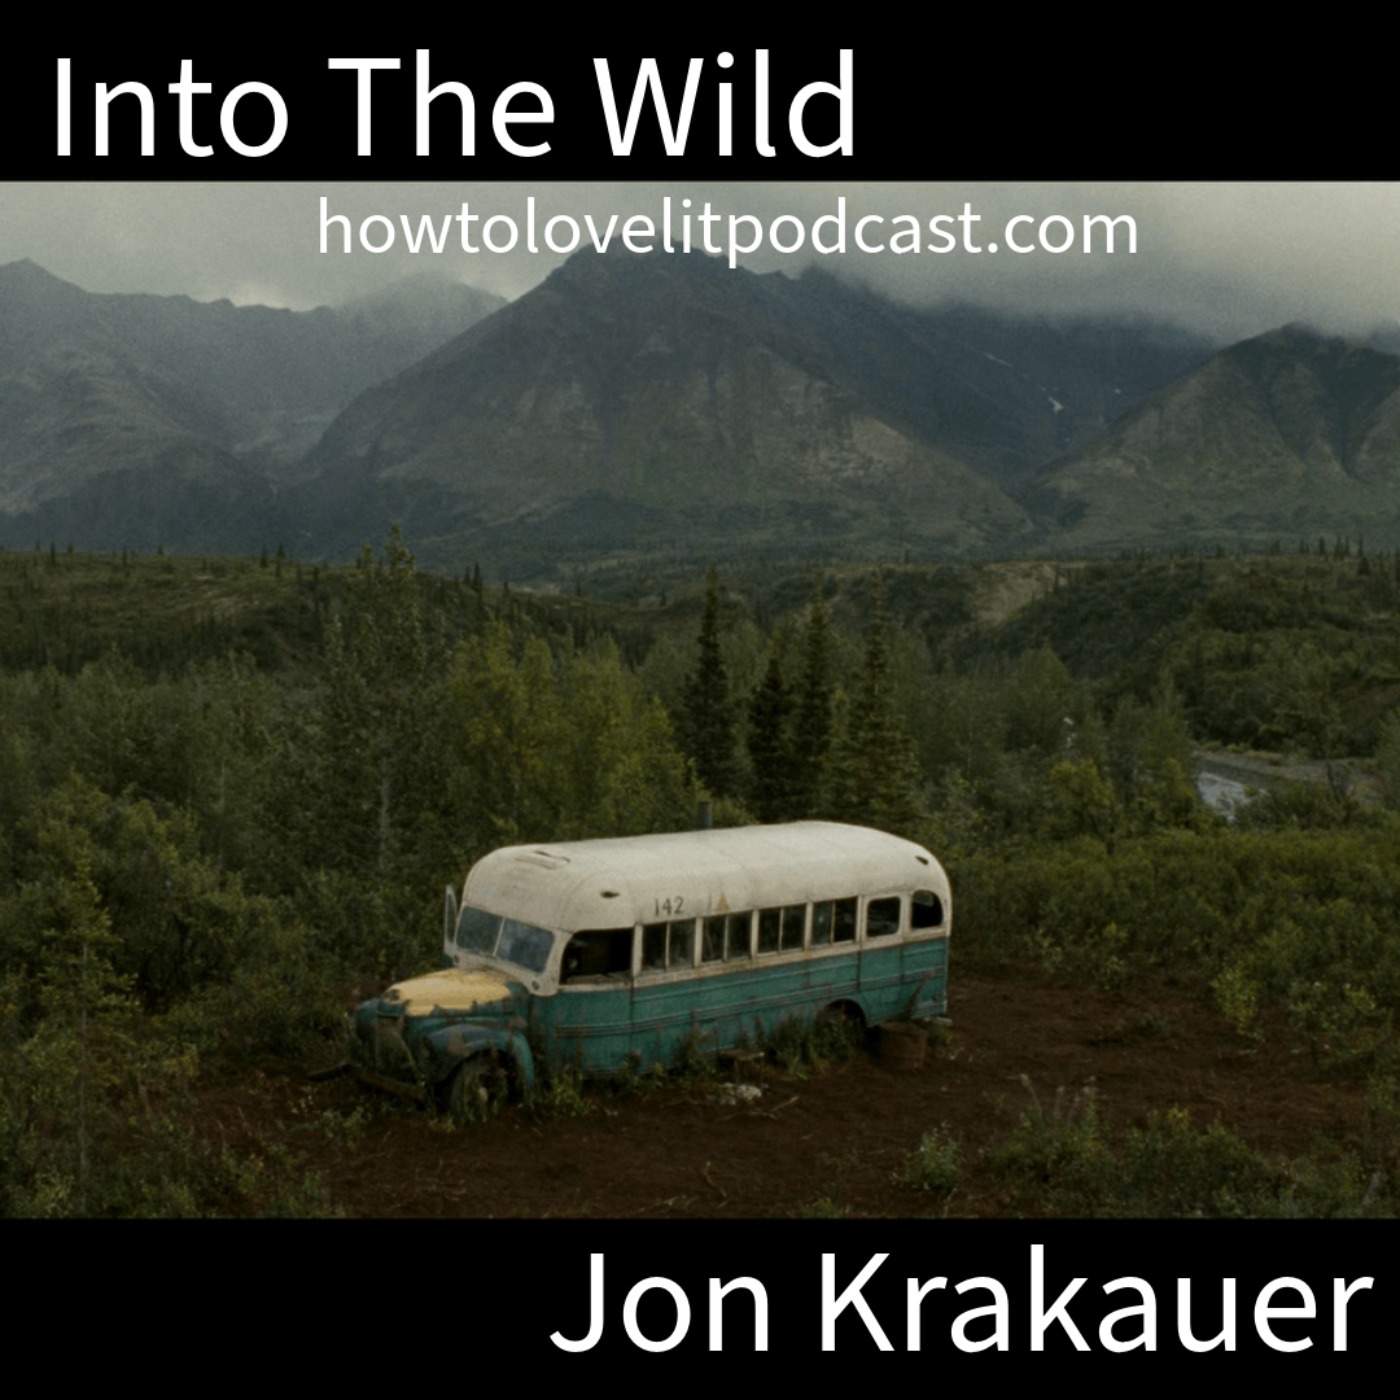 Into The Wild - Jon Krakauer - Episode 1 - The Creation Of A ”Story World”!